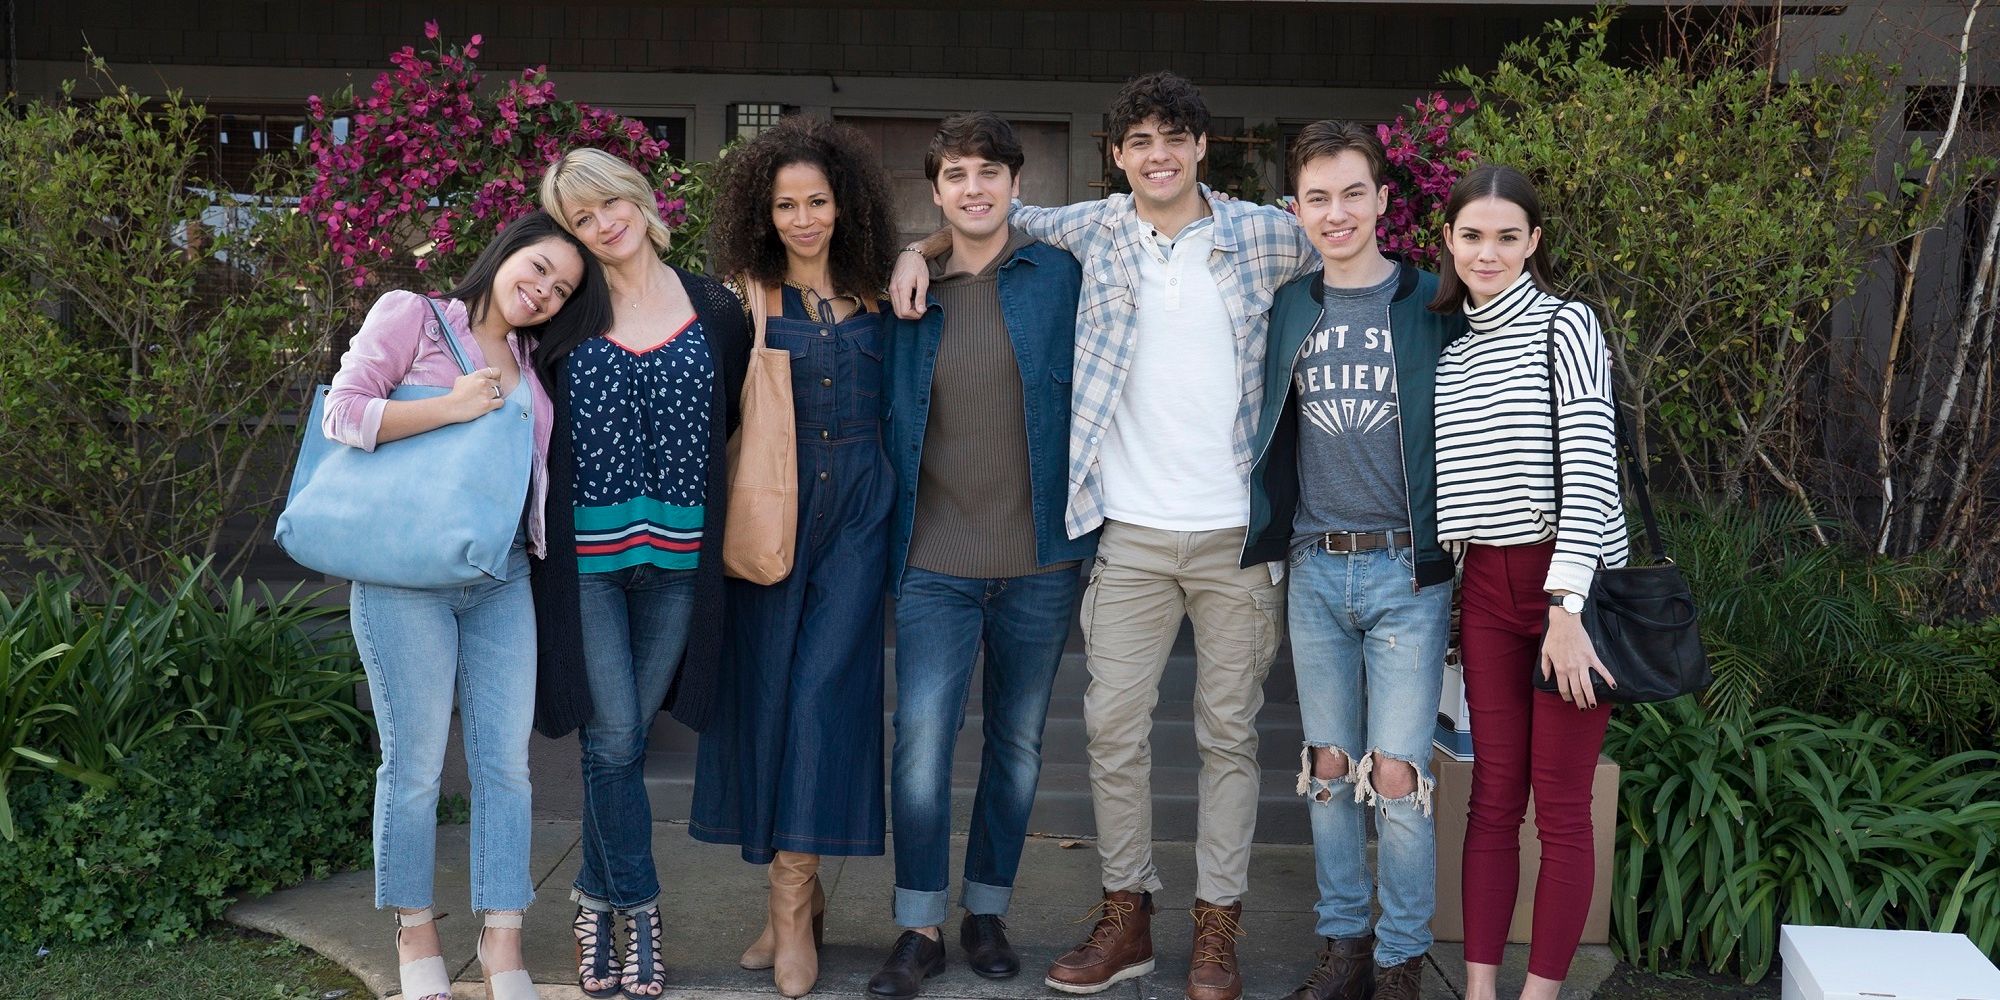 10 Best The Fosters Episodes According To IMDb